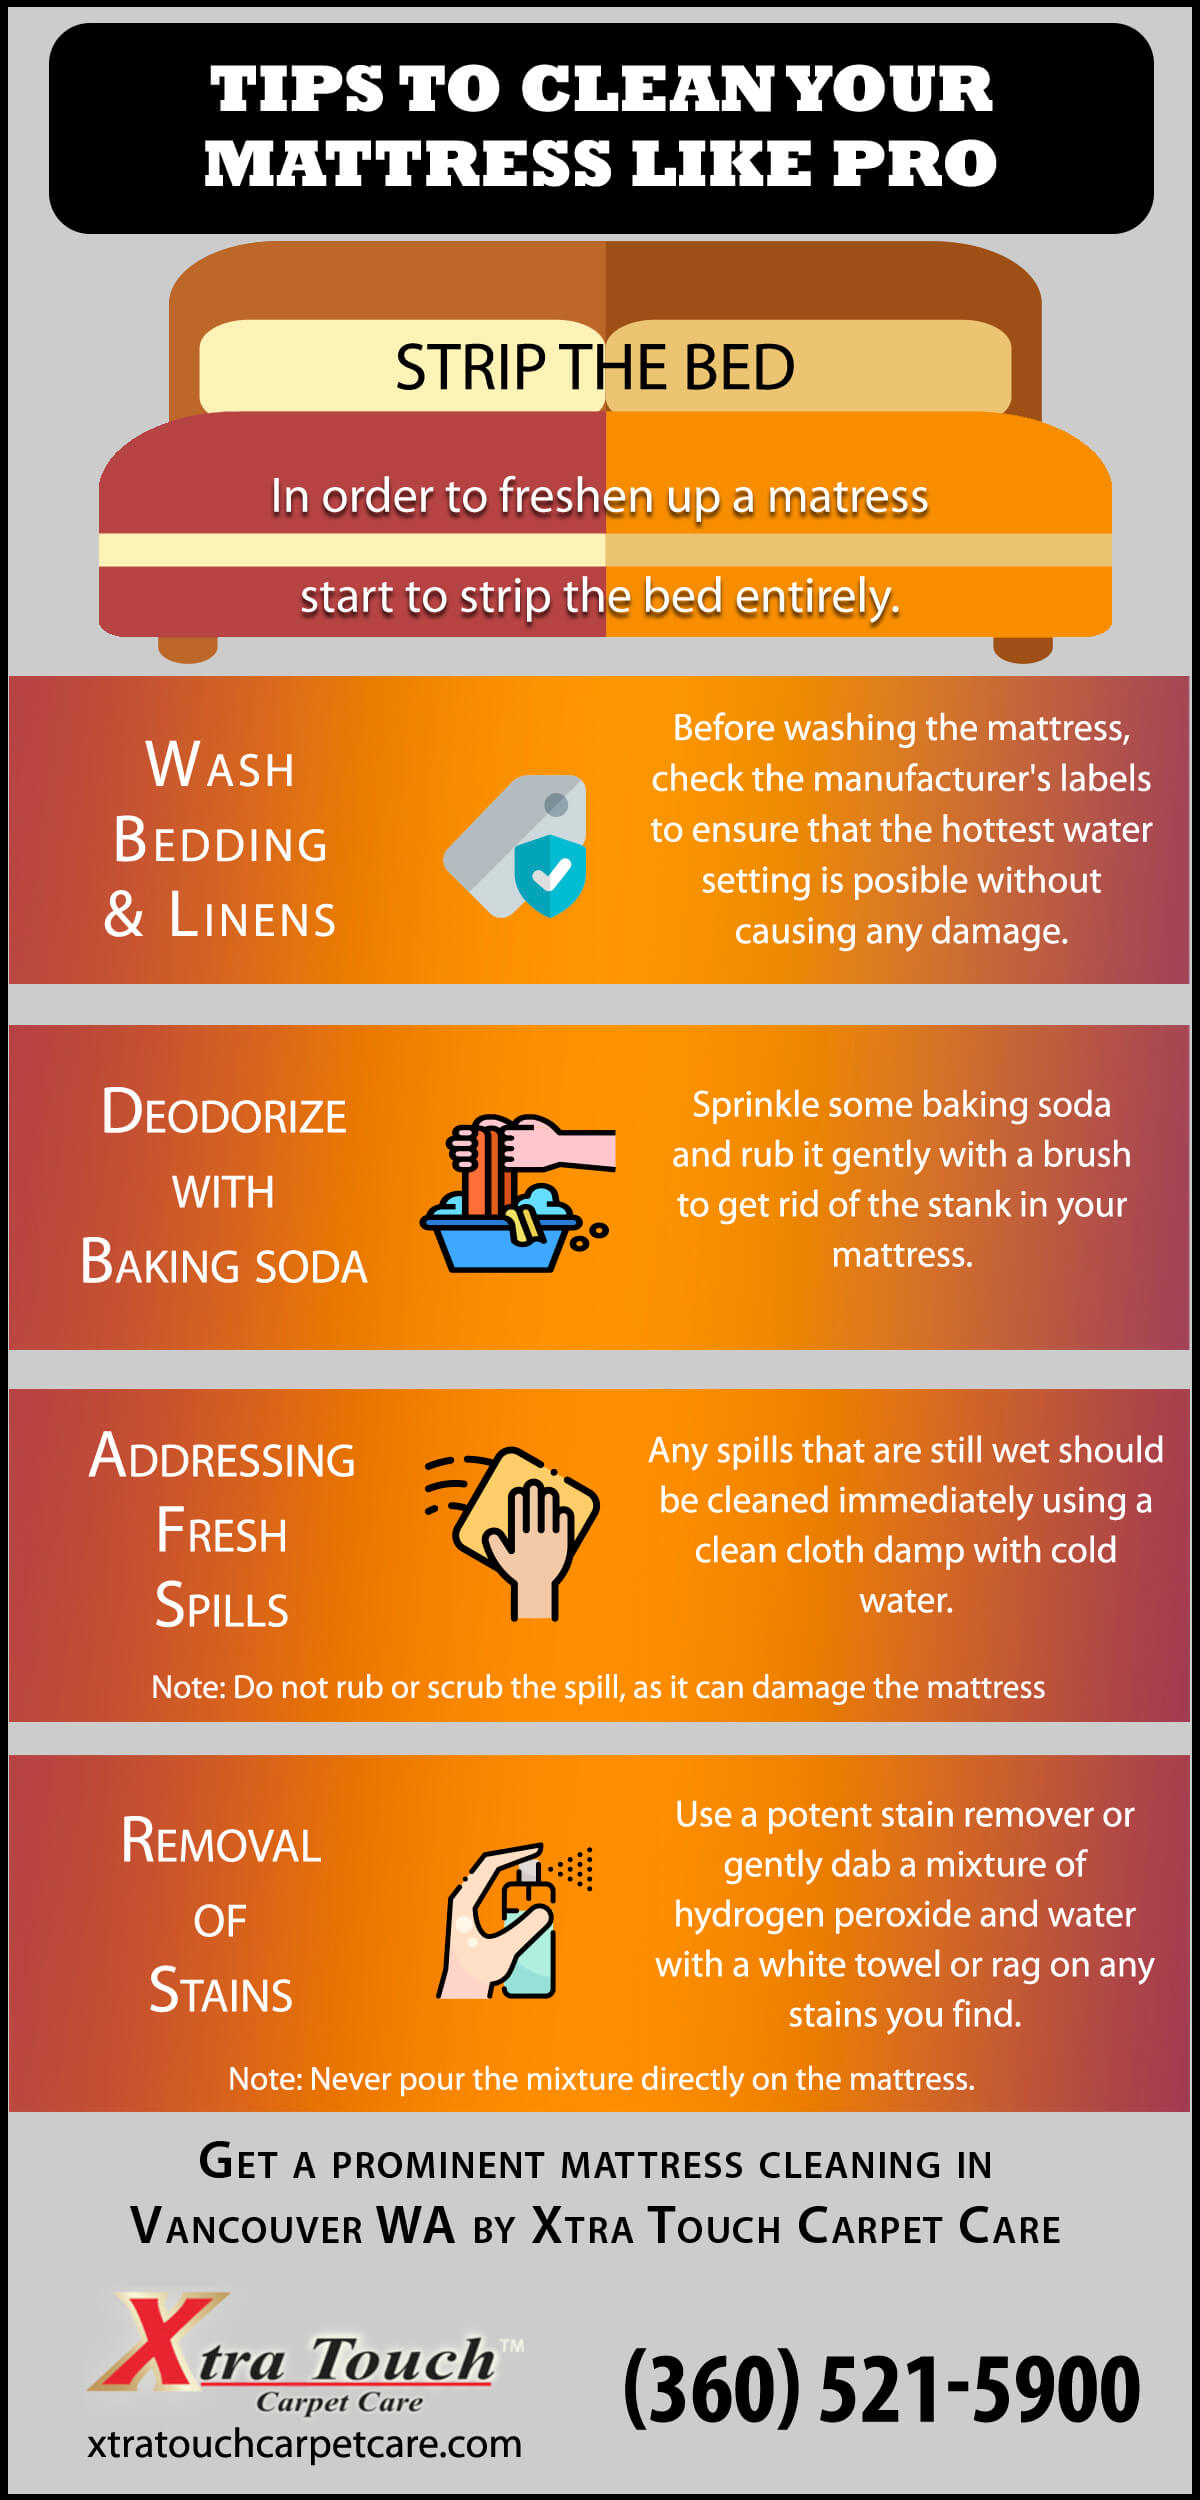 Tips to Clean Your Mattress like Pro Infographic